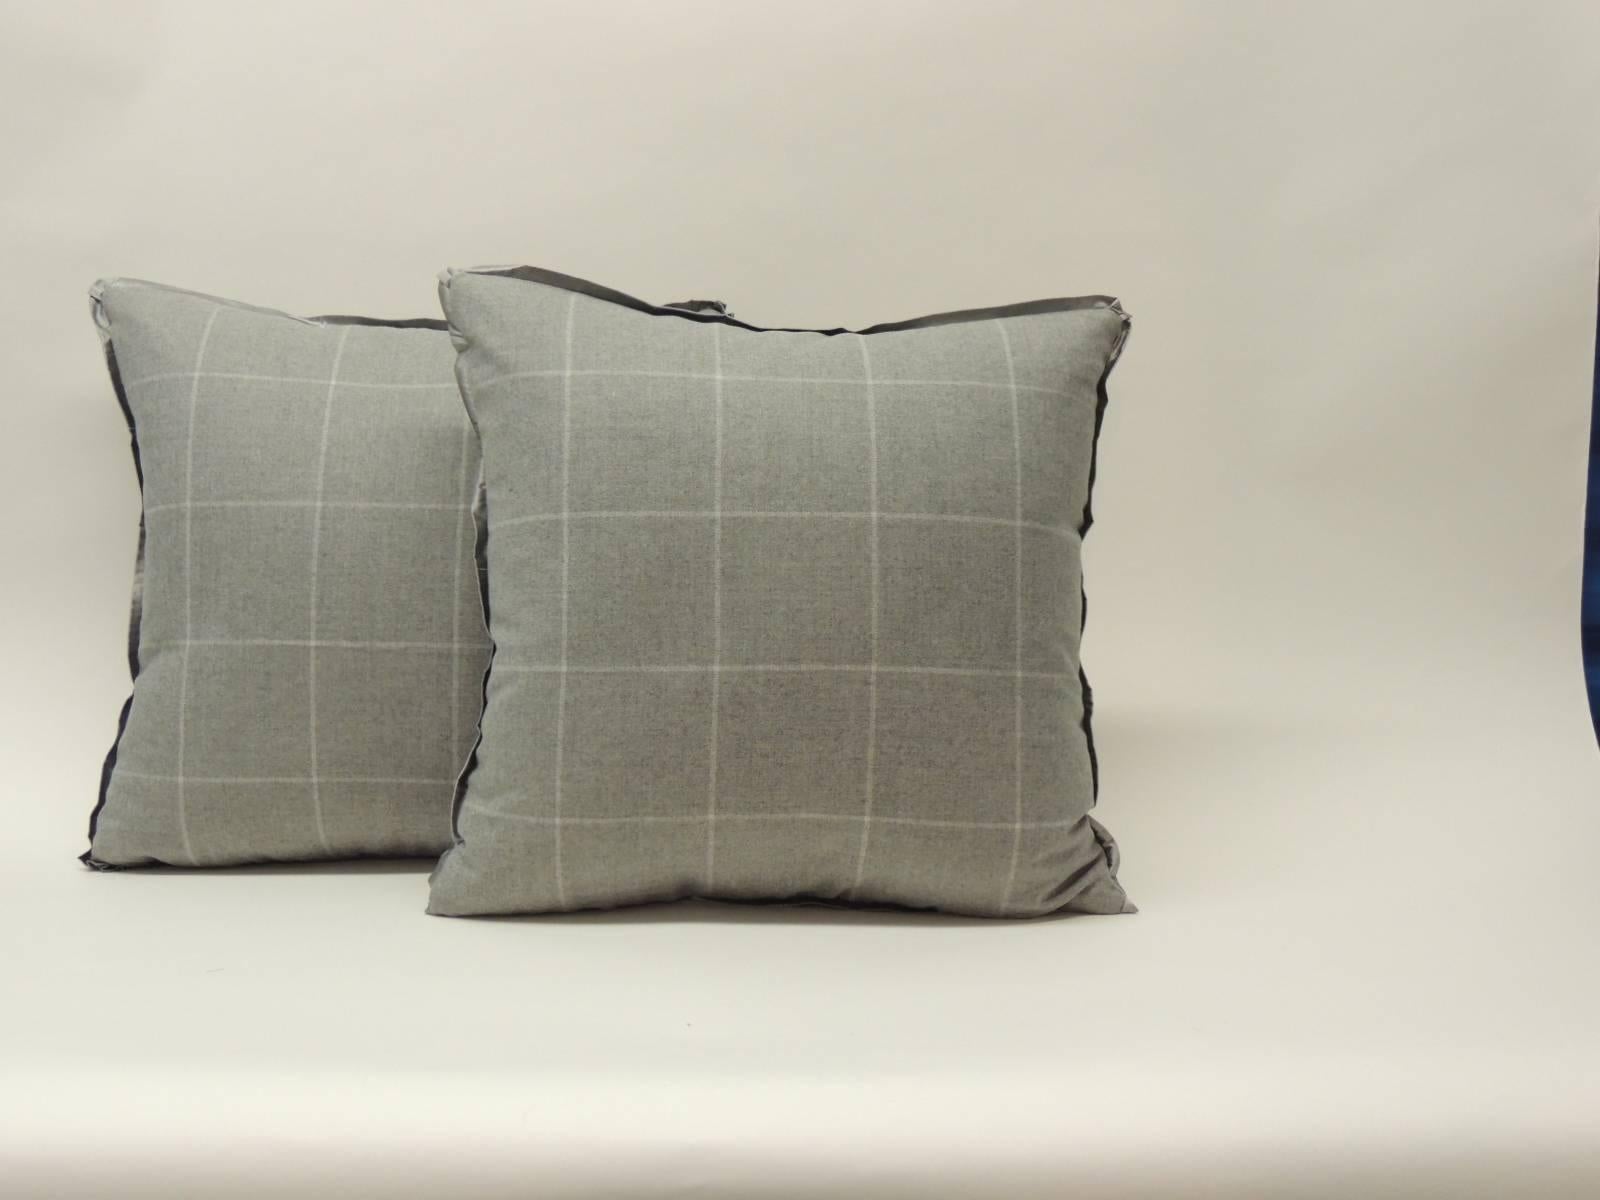 Hollywood Regency Pair of Vintage Loro Piana Cashmere Decorative Double-Sided Pillows